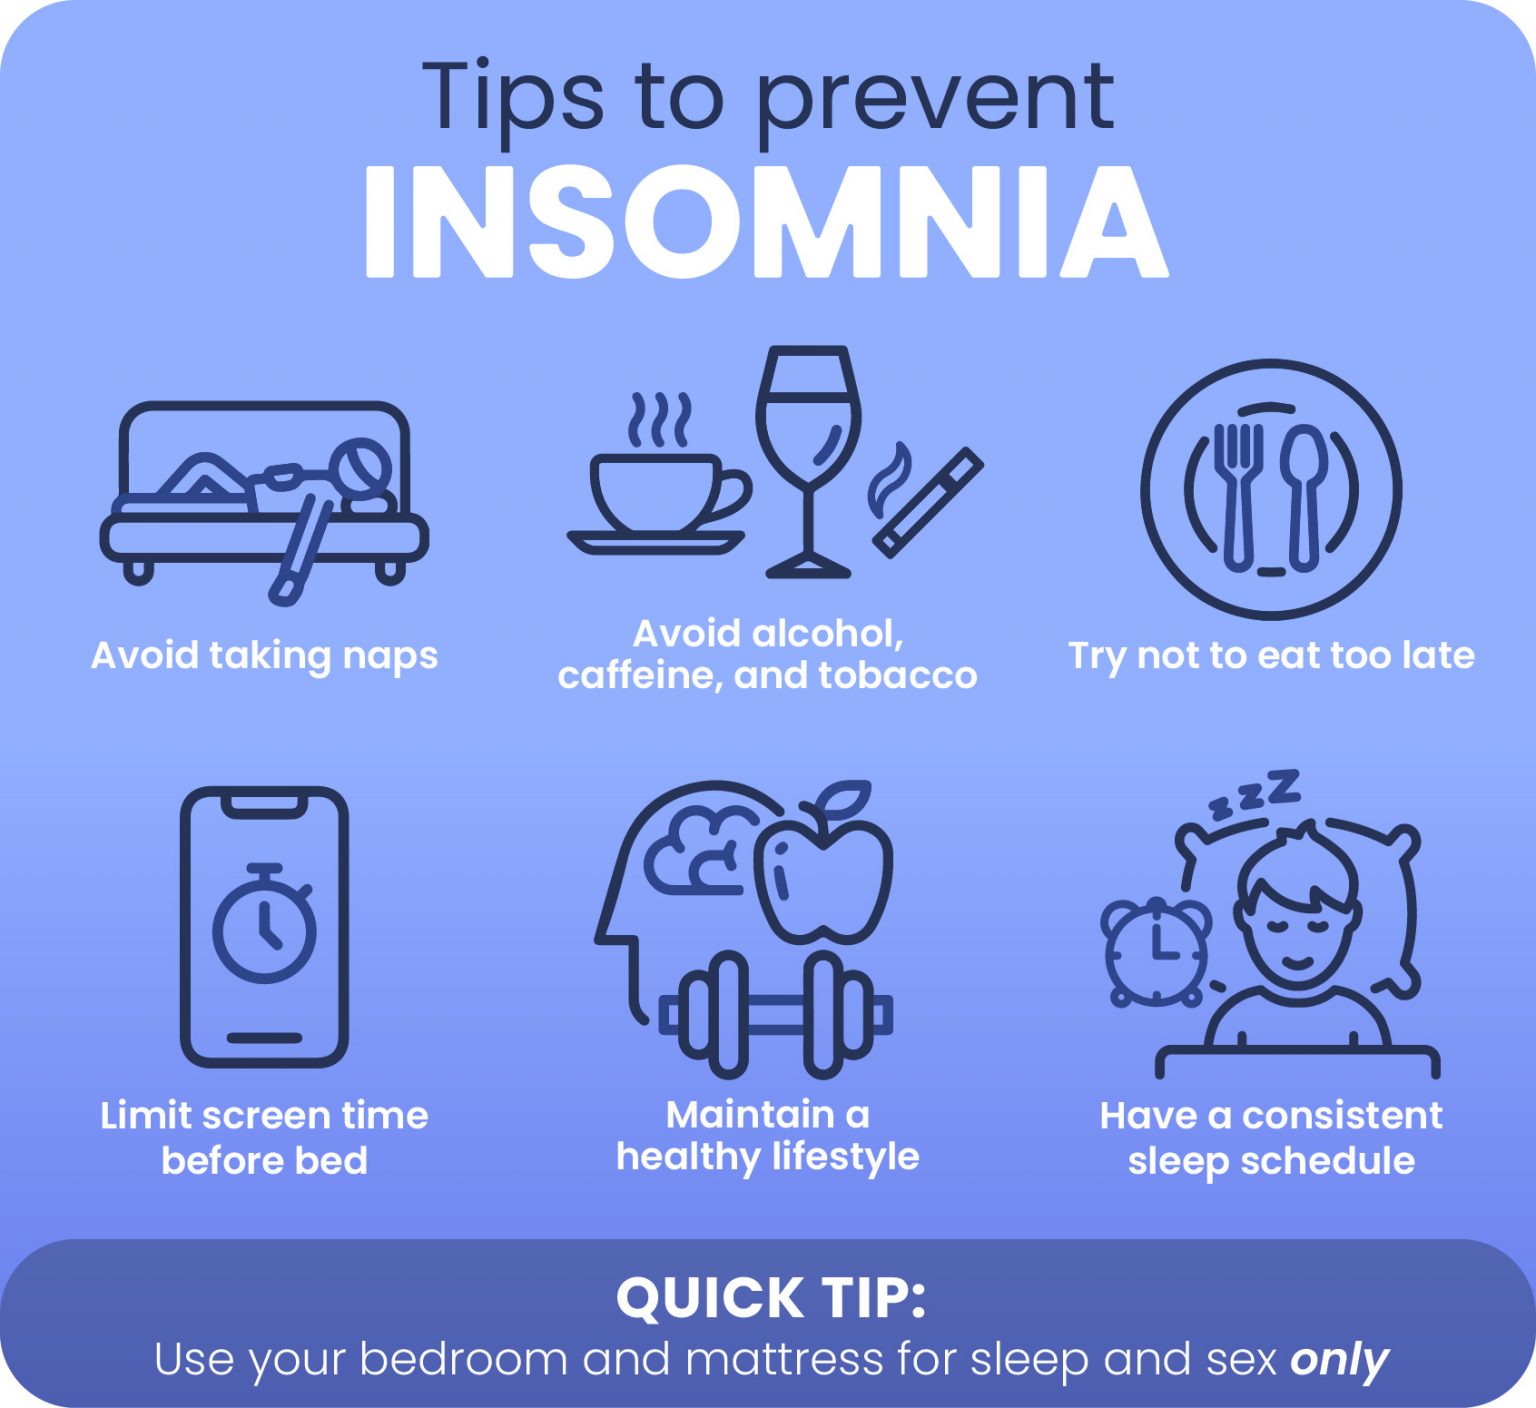 Infographic of tips to prevent insomnia.